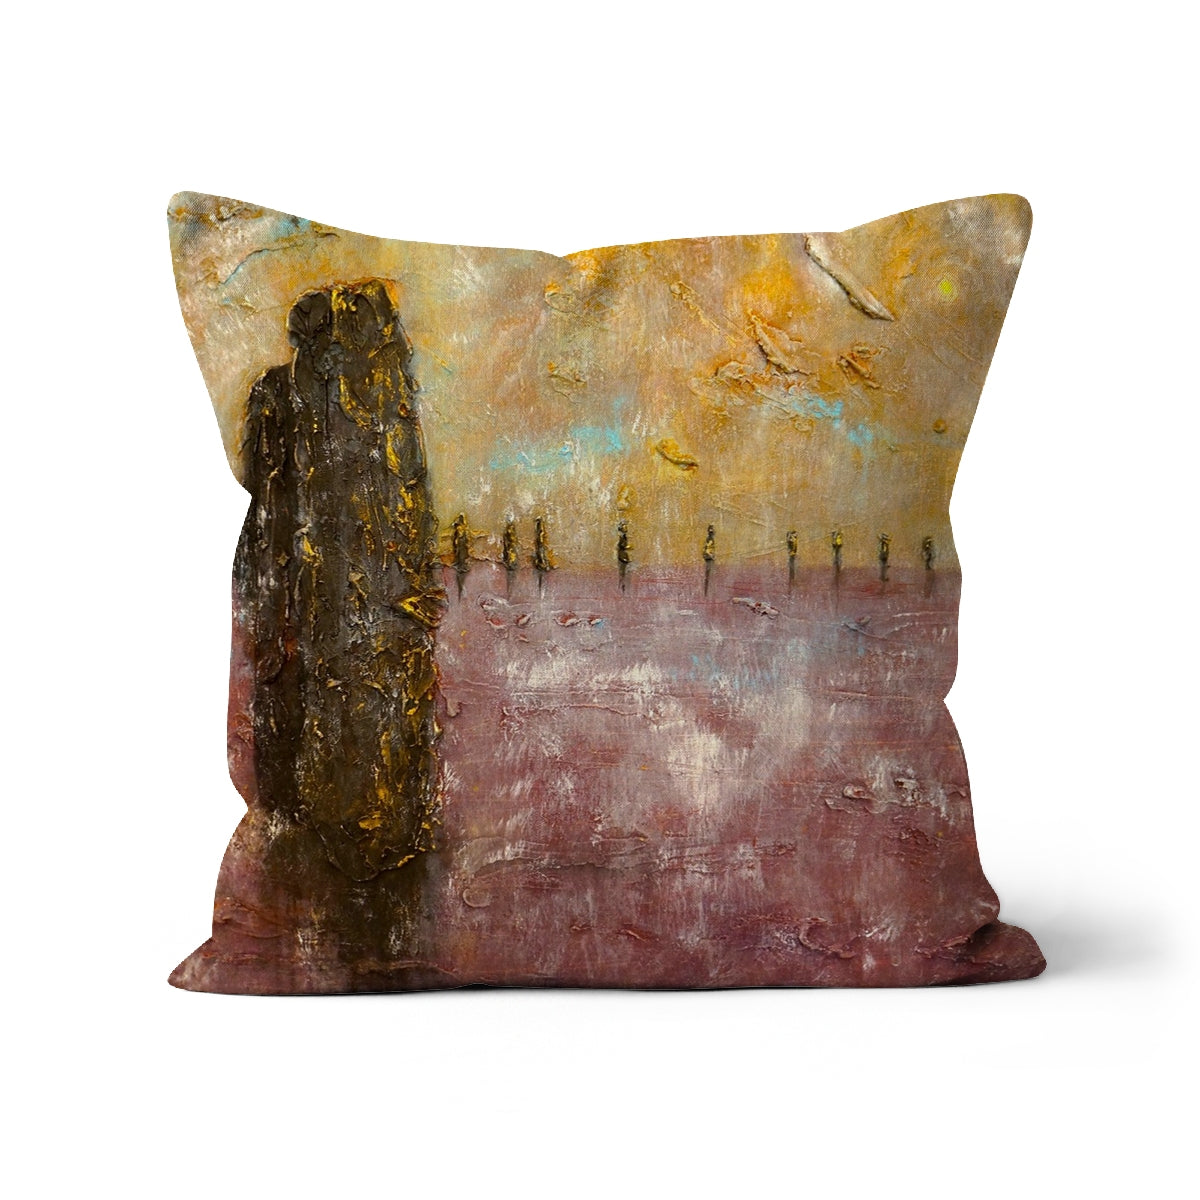 Bordgar Mist Orkney Art Gifts Cushion-Cushions-Orkney Art Gallery-Linen-18"x18"-Paintings, Prints, Homeware, Art Gifts From Scotland By Scottish Artist Kevin Hunter